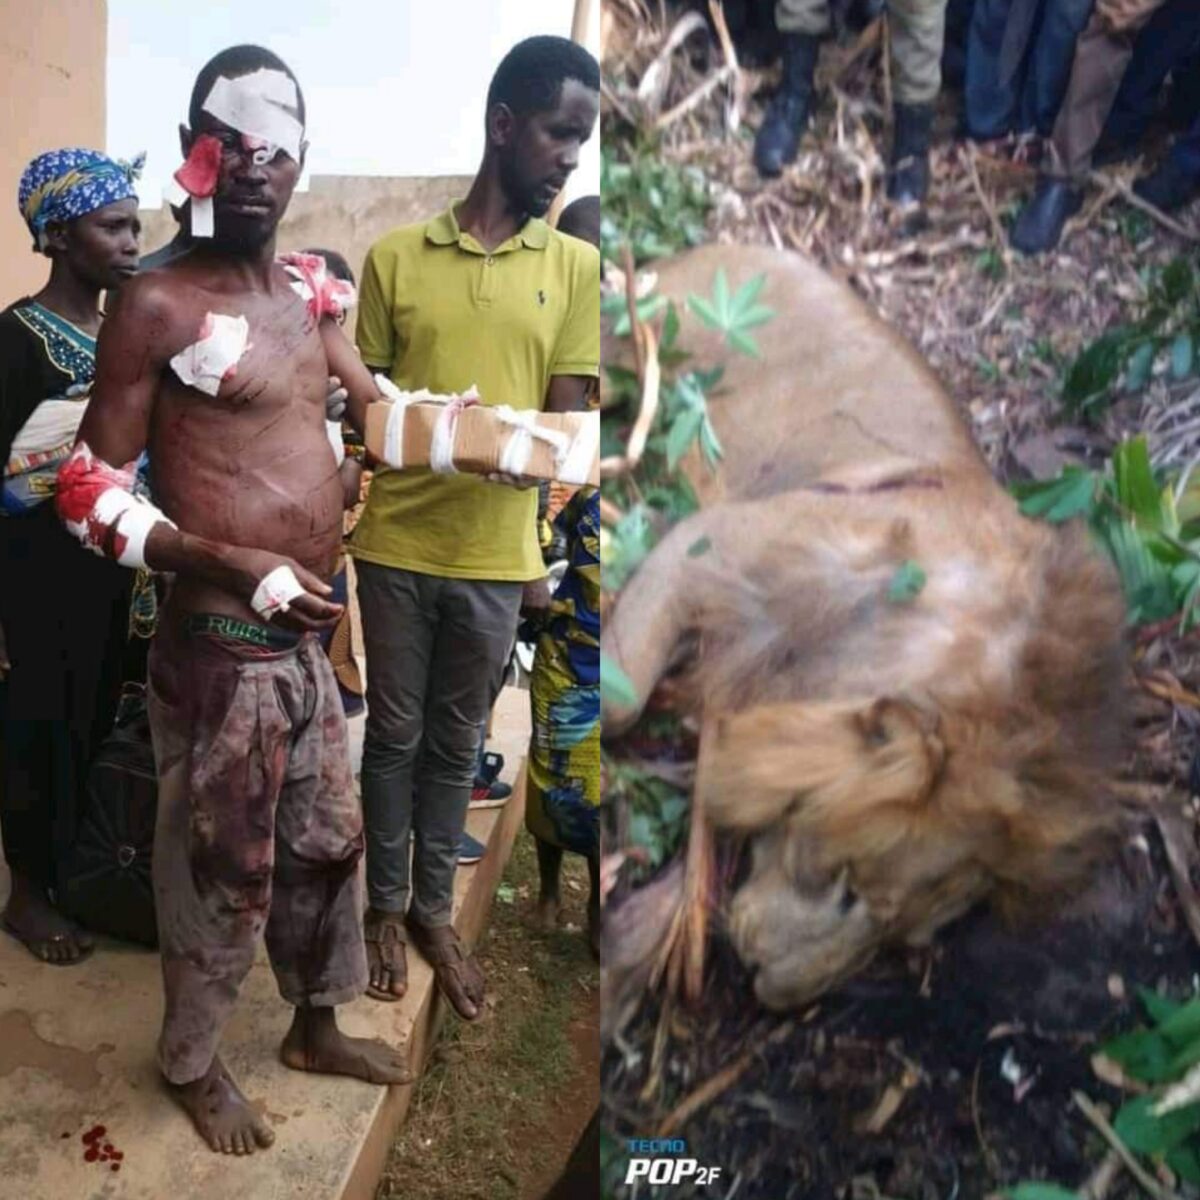 Uganda Man Killed Lion With His Bare Hands (Photos)